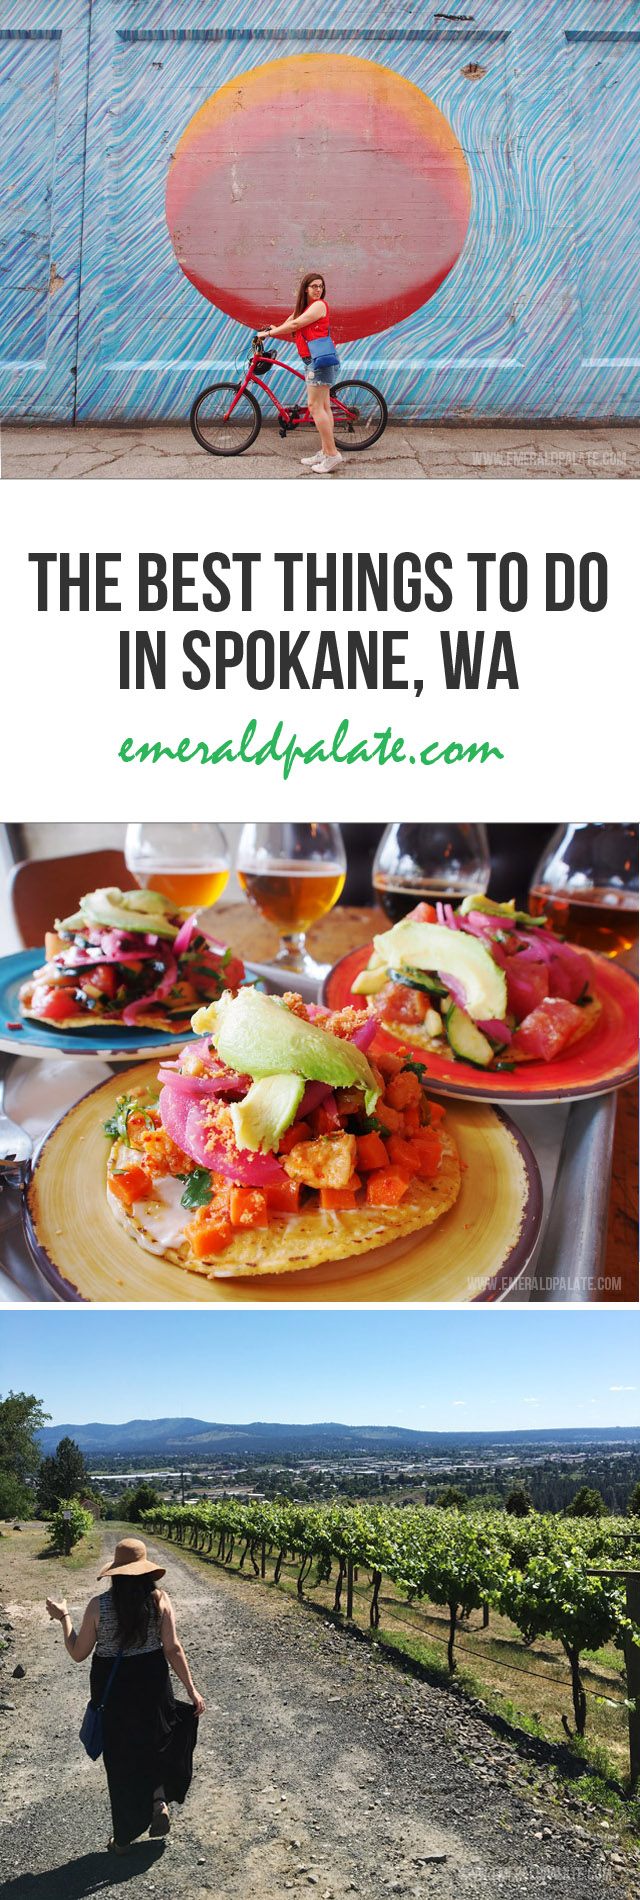 A curated list of the best things to do in Spokane, WA, according to locals. I asked Spokane locals how to explore this eastern Washington city like a local. They told me the hidden restaurants, hotels, and things to do in this historic Washington town.